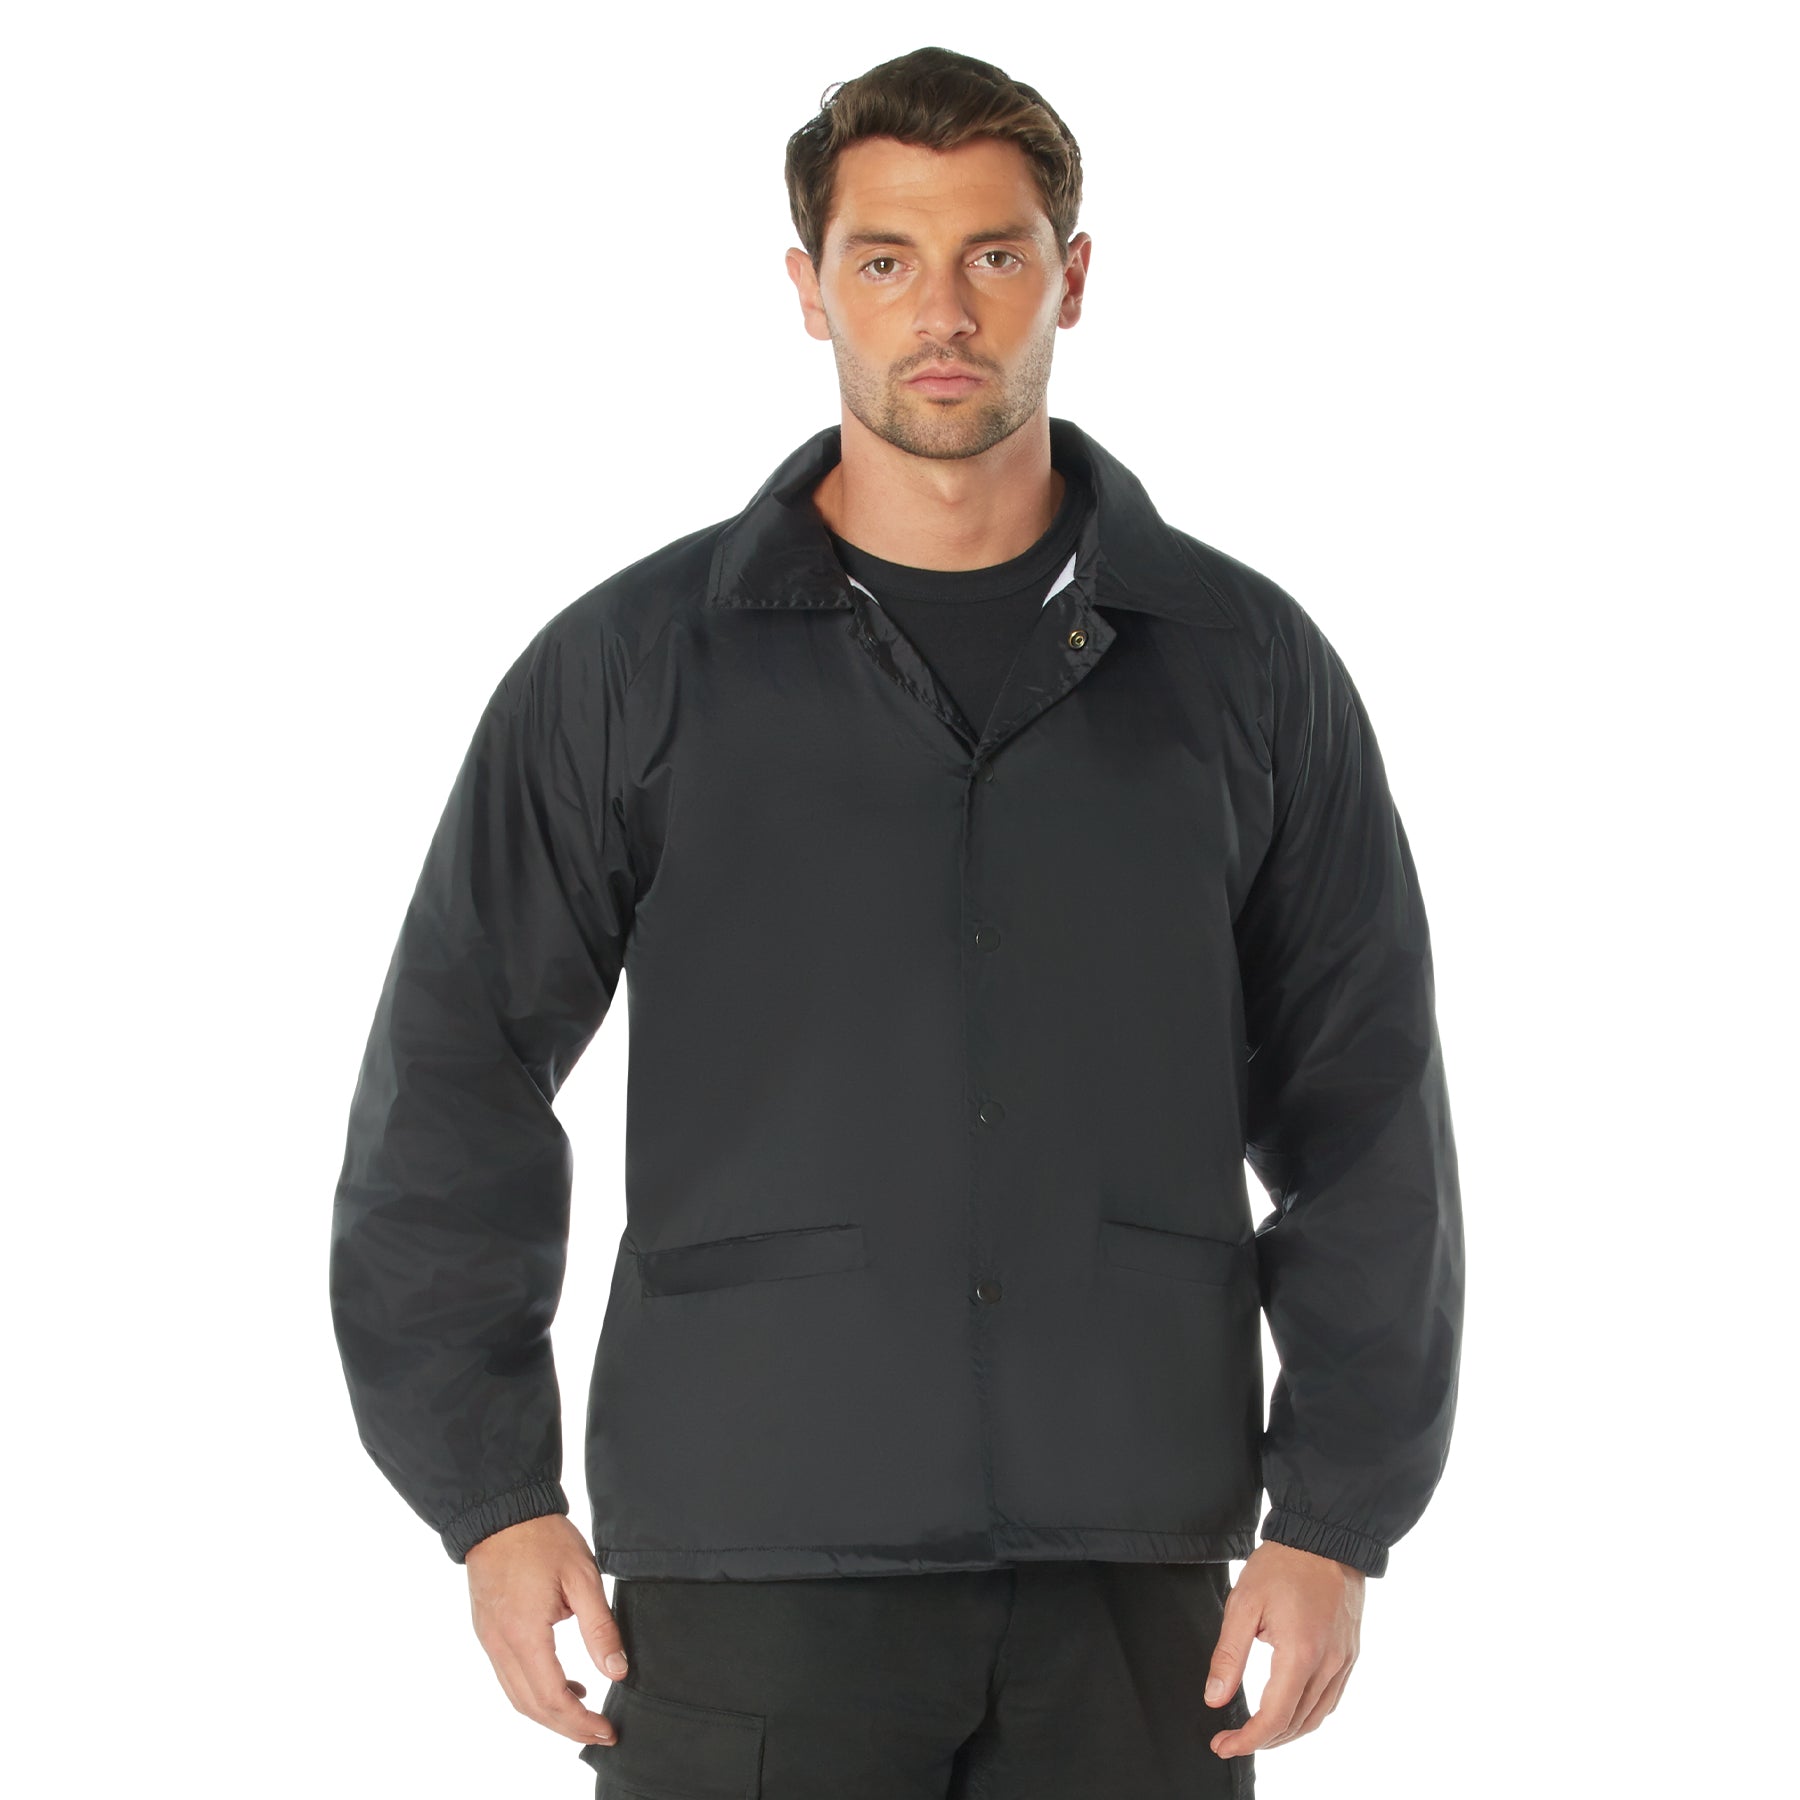 Rothco Lined Coaches Security Jacket - Tactical Choice Plus